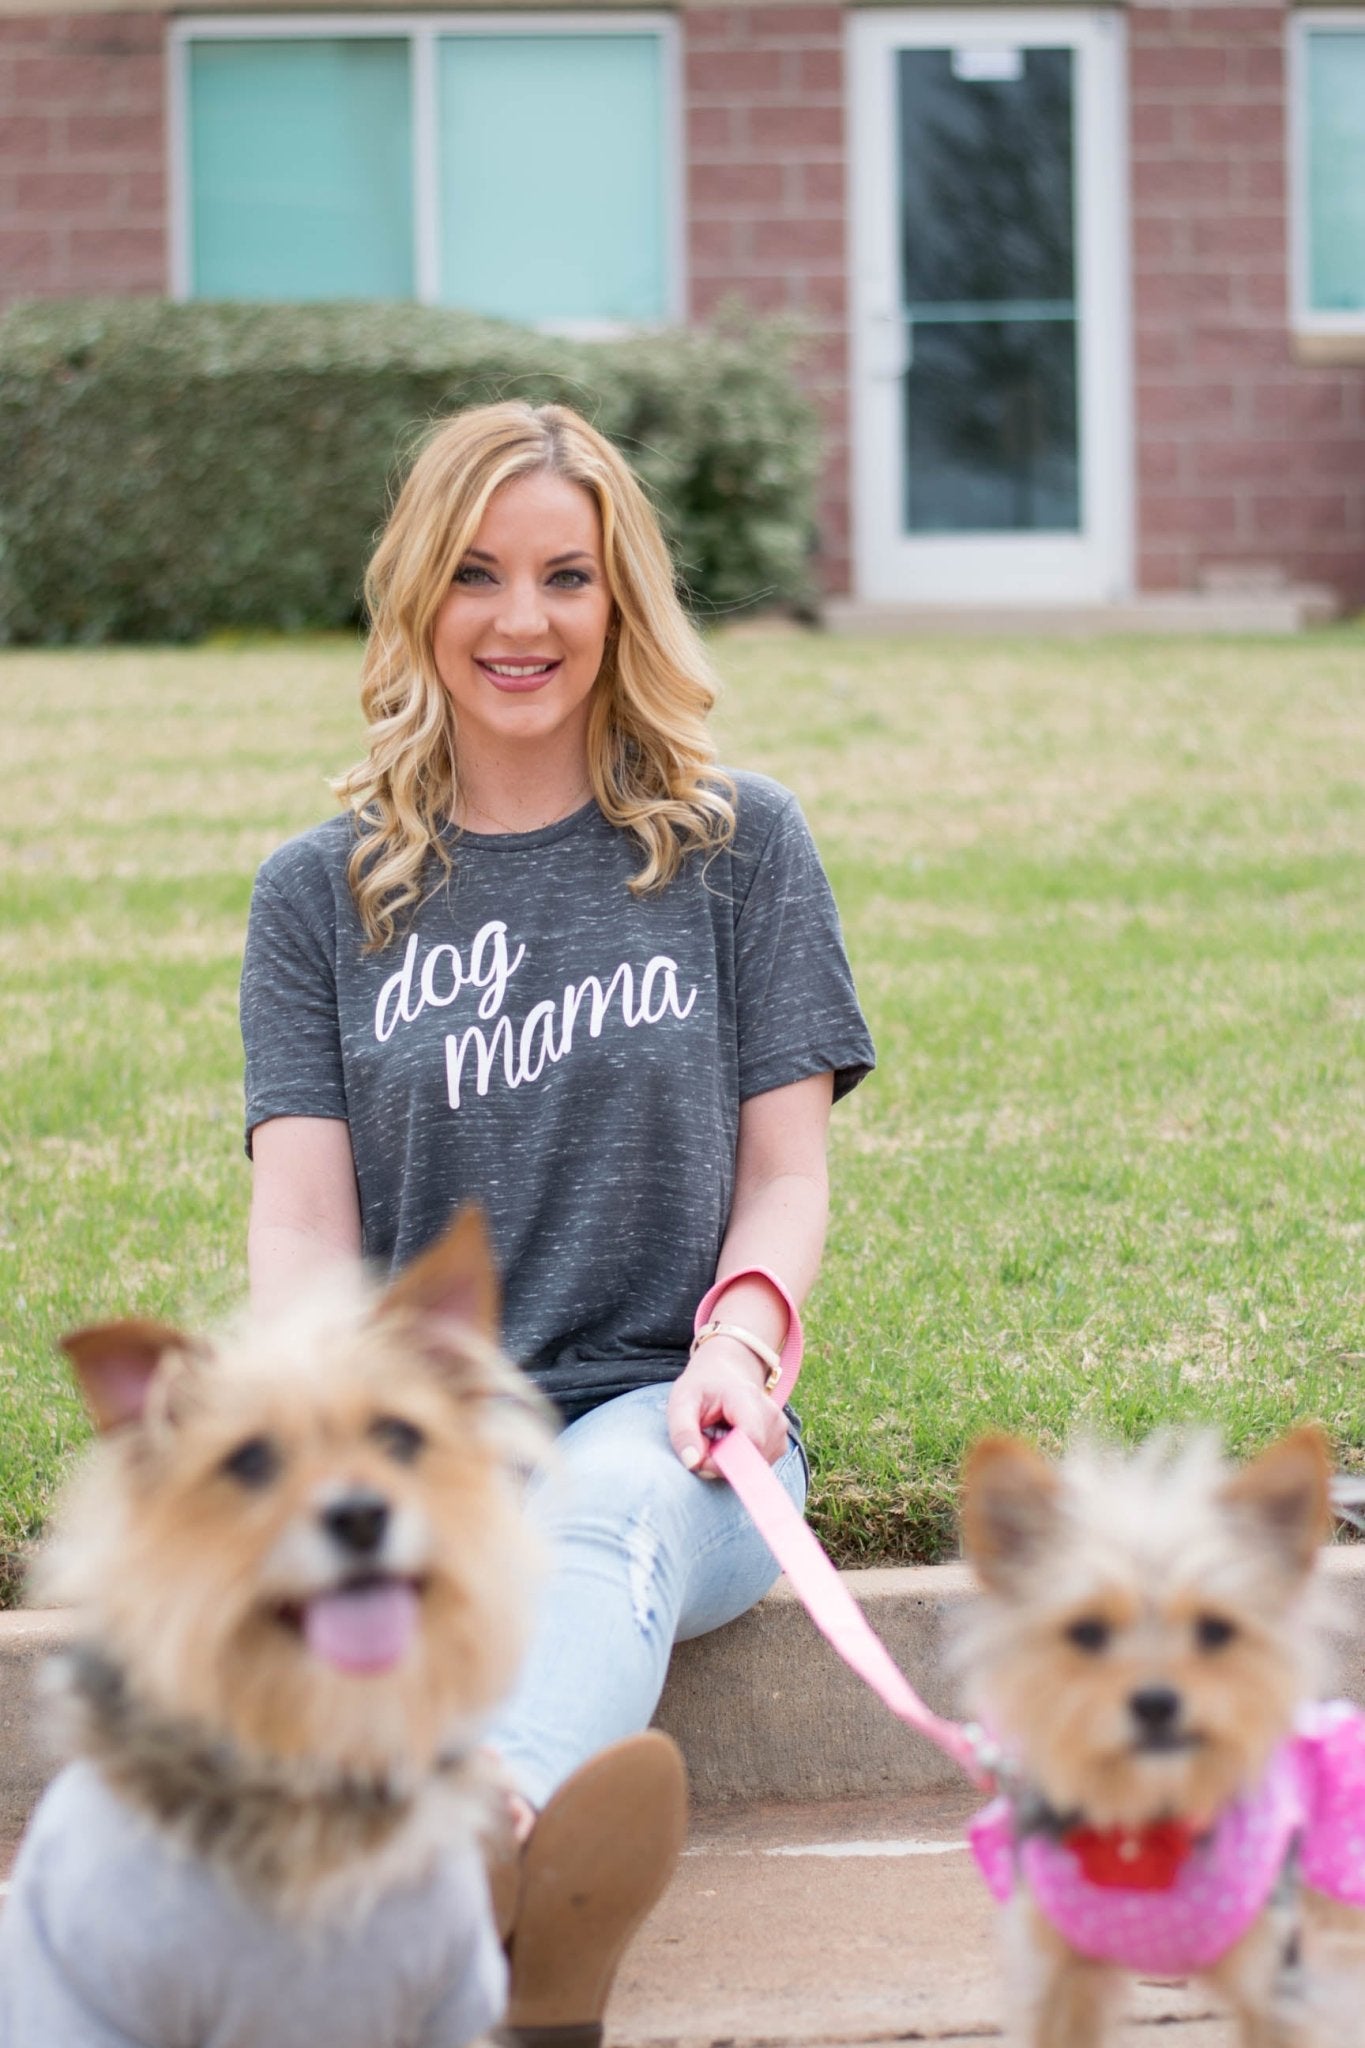 Unique Dog Mom T-Shirts for Mother's Day at Lush Fashion Lounge in OKC